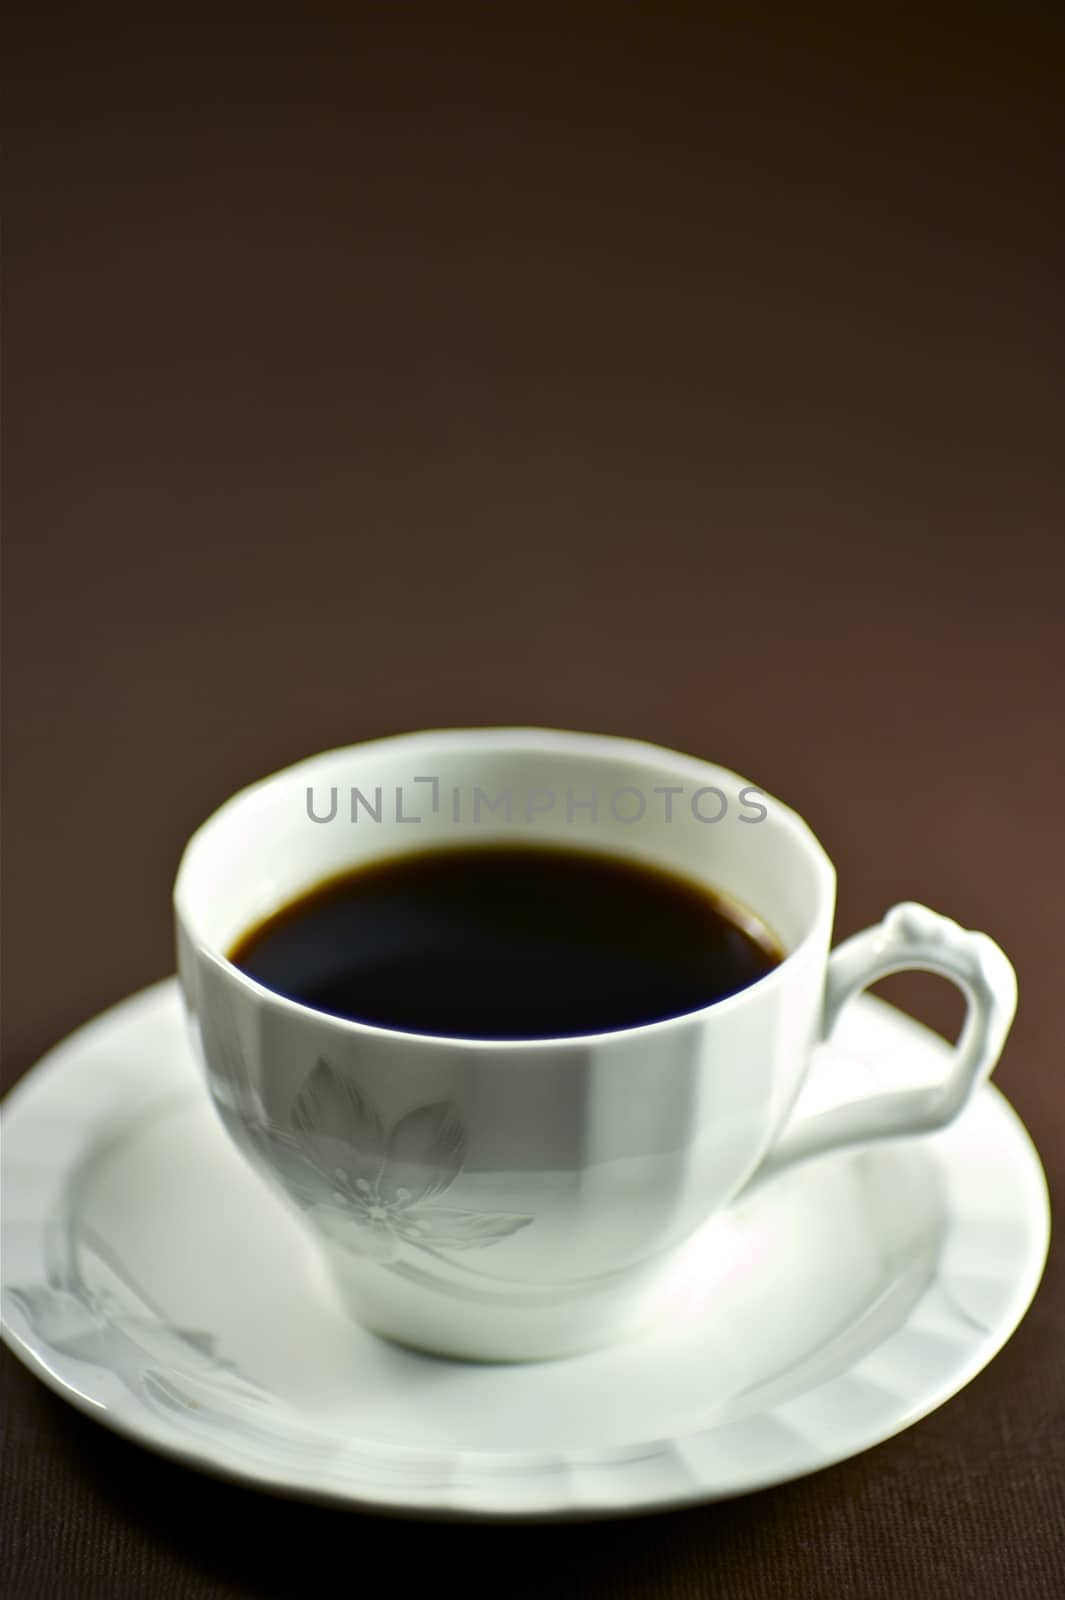 Black Coffee Cup. White Coffee Cup and Dark Brown Background.